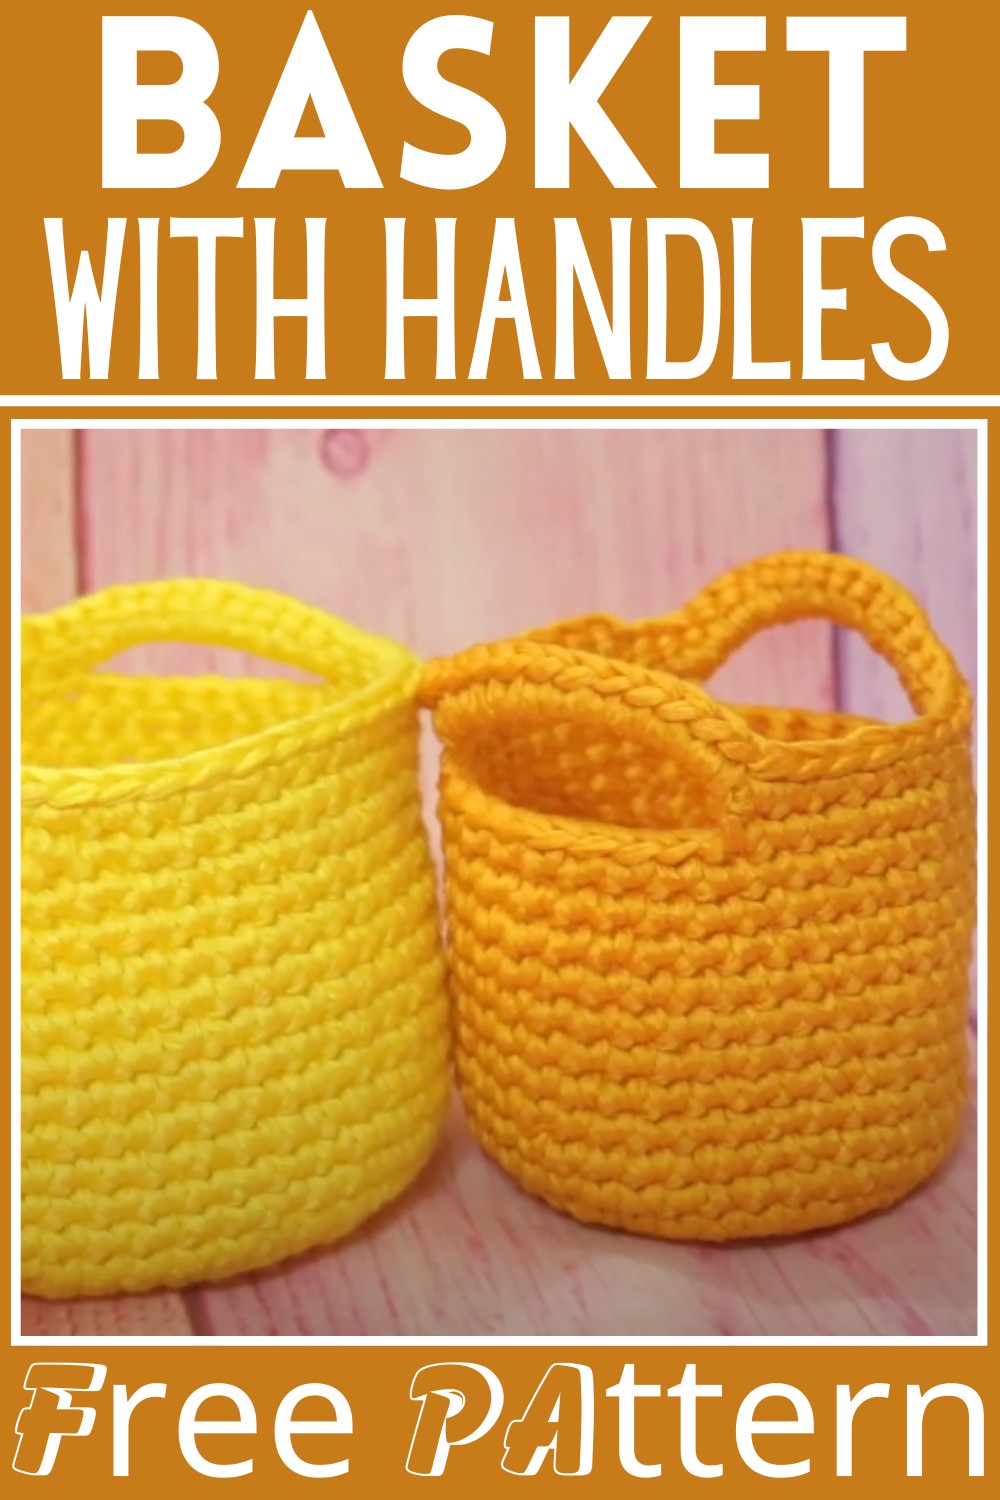 How To Make Crochet Basket With Handles